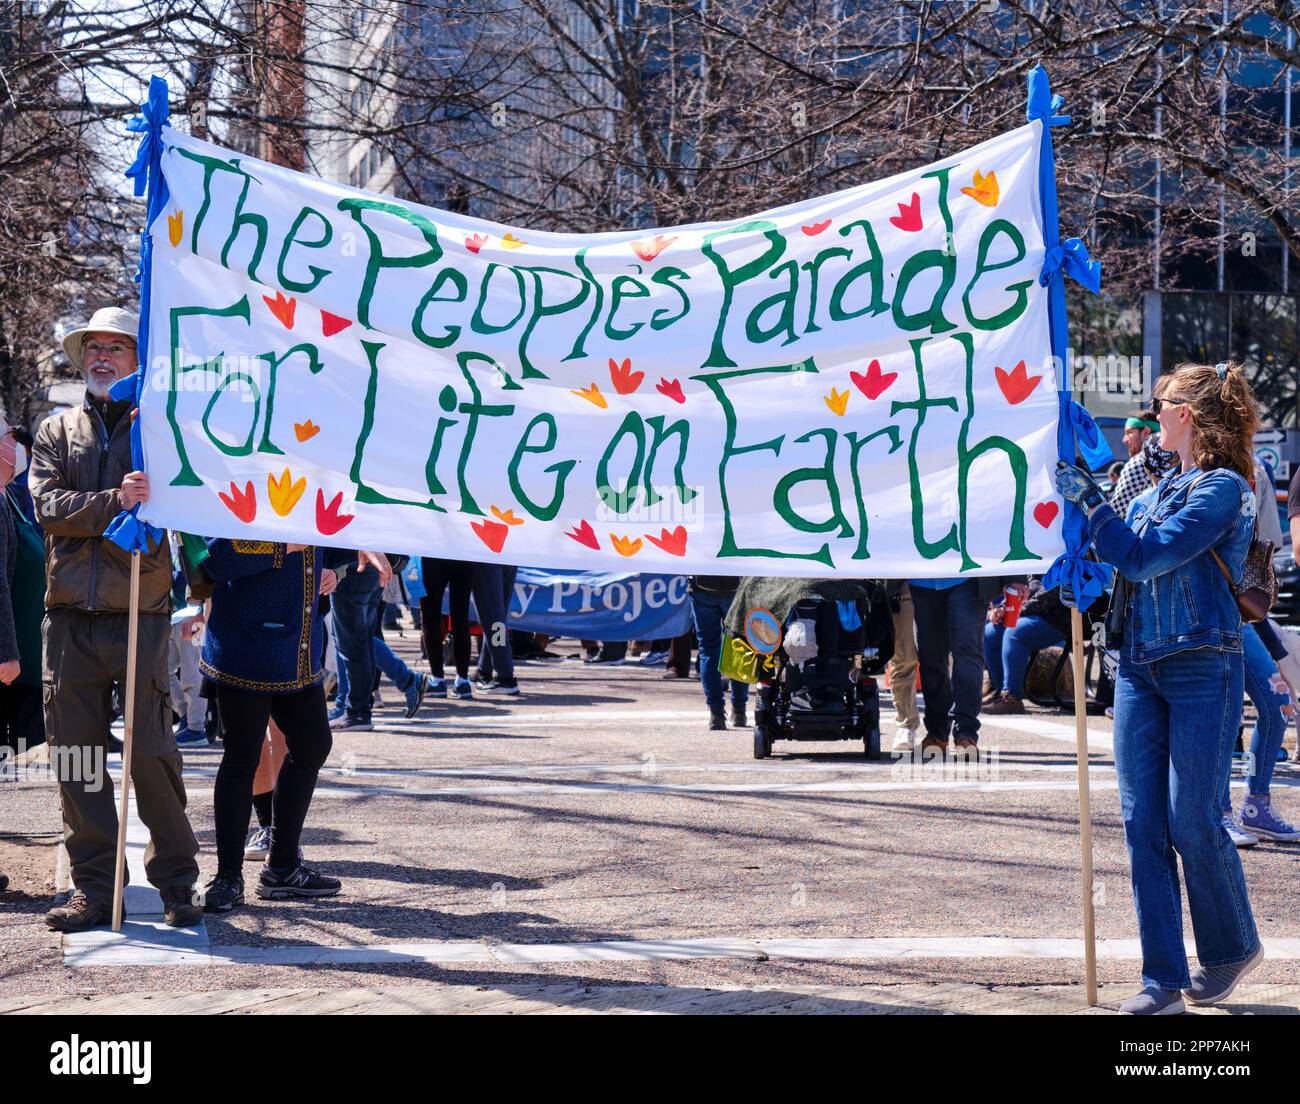 Halifax, Canada. April 22, 2023. Hundreds walked along the harbour in the annual Earth Day Parade in Halifax Nova Scotia. Under the theme “The People's Parade for Life on Earth '' it gathered participants demanding action to preserve our planet. Credit: meanderingemu/Alamy Live News Stock Photo